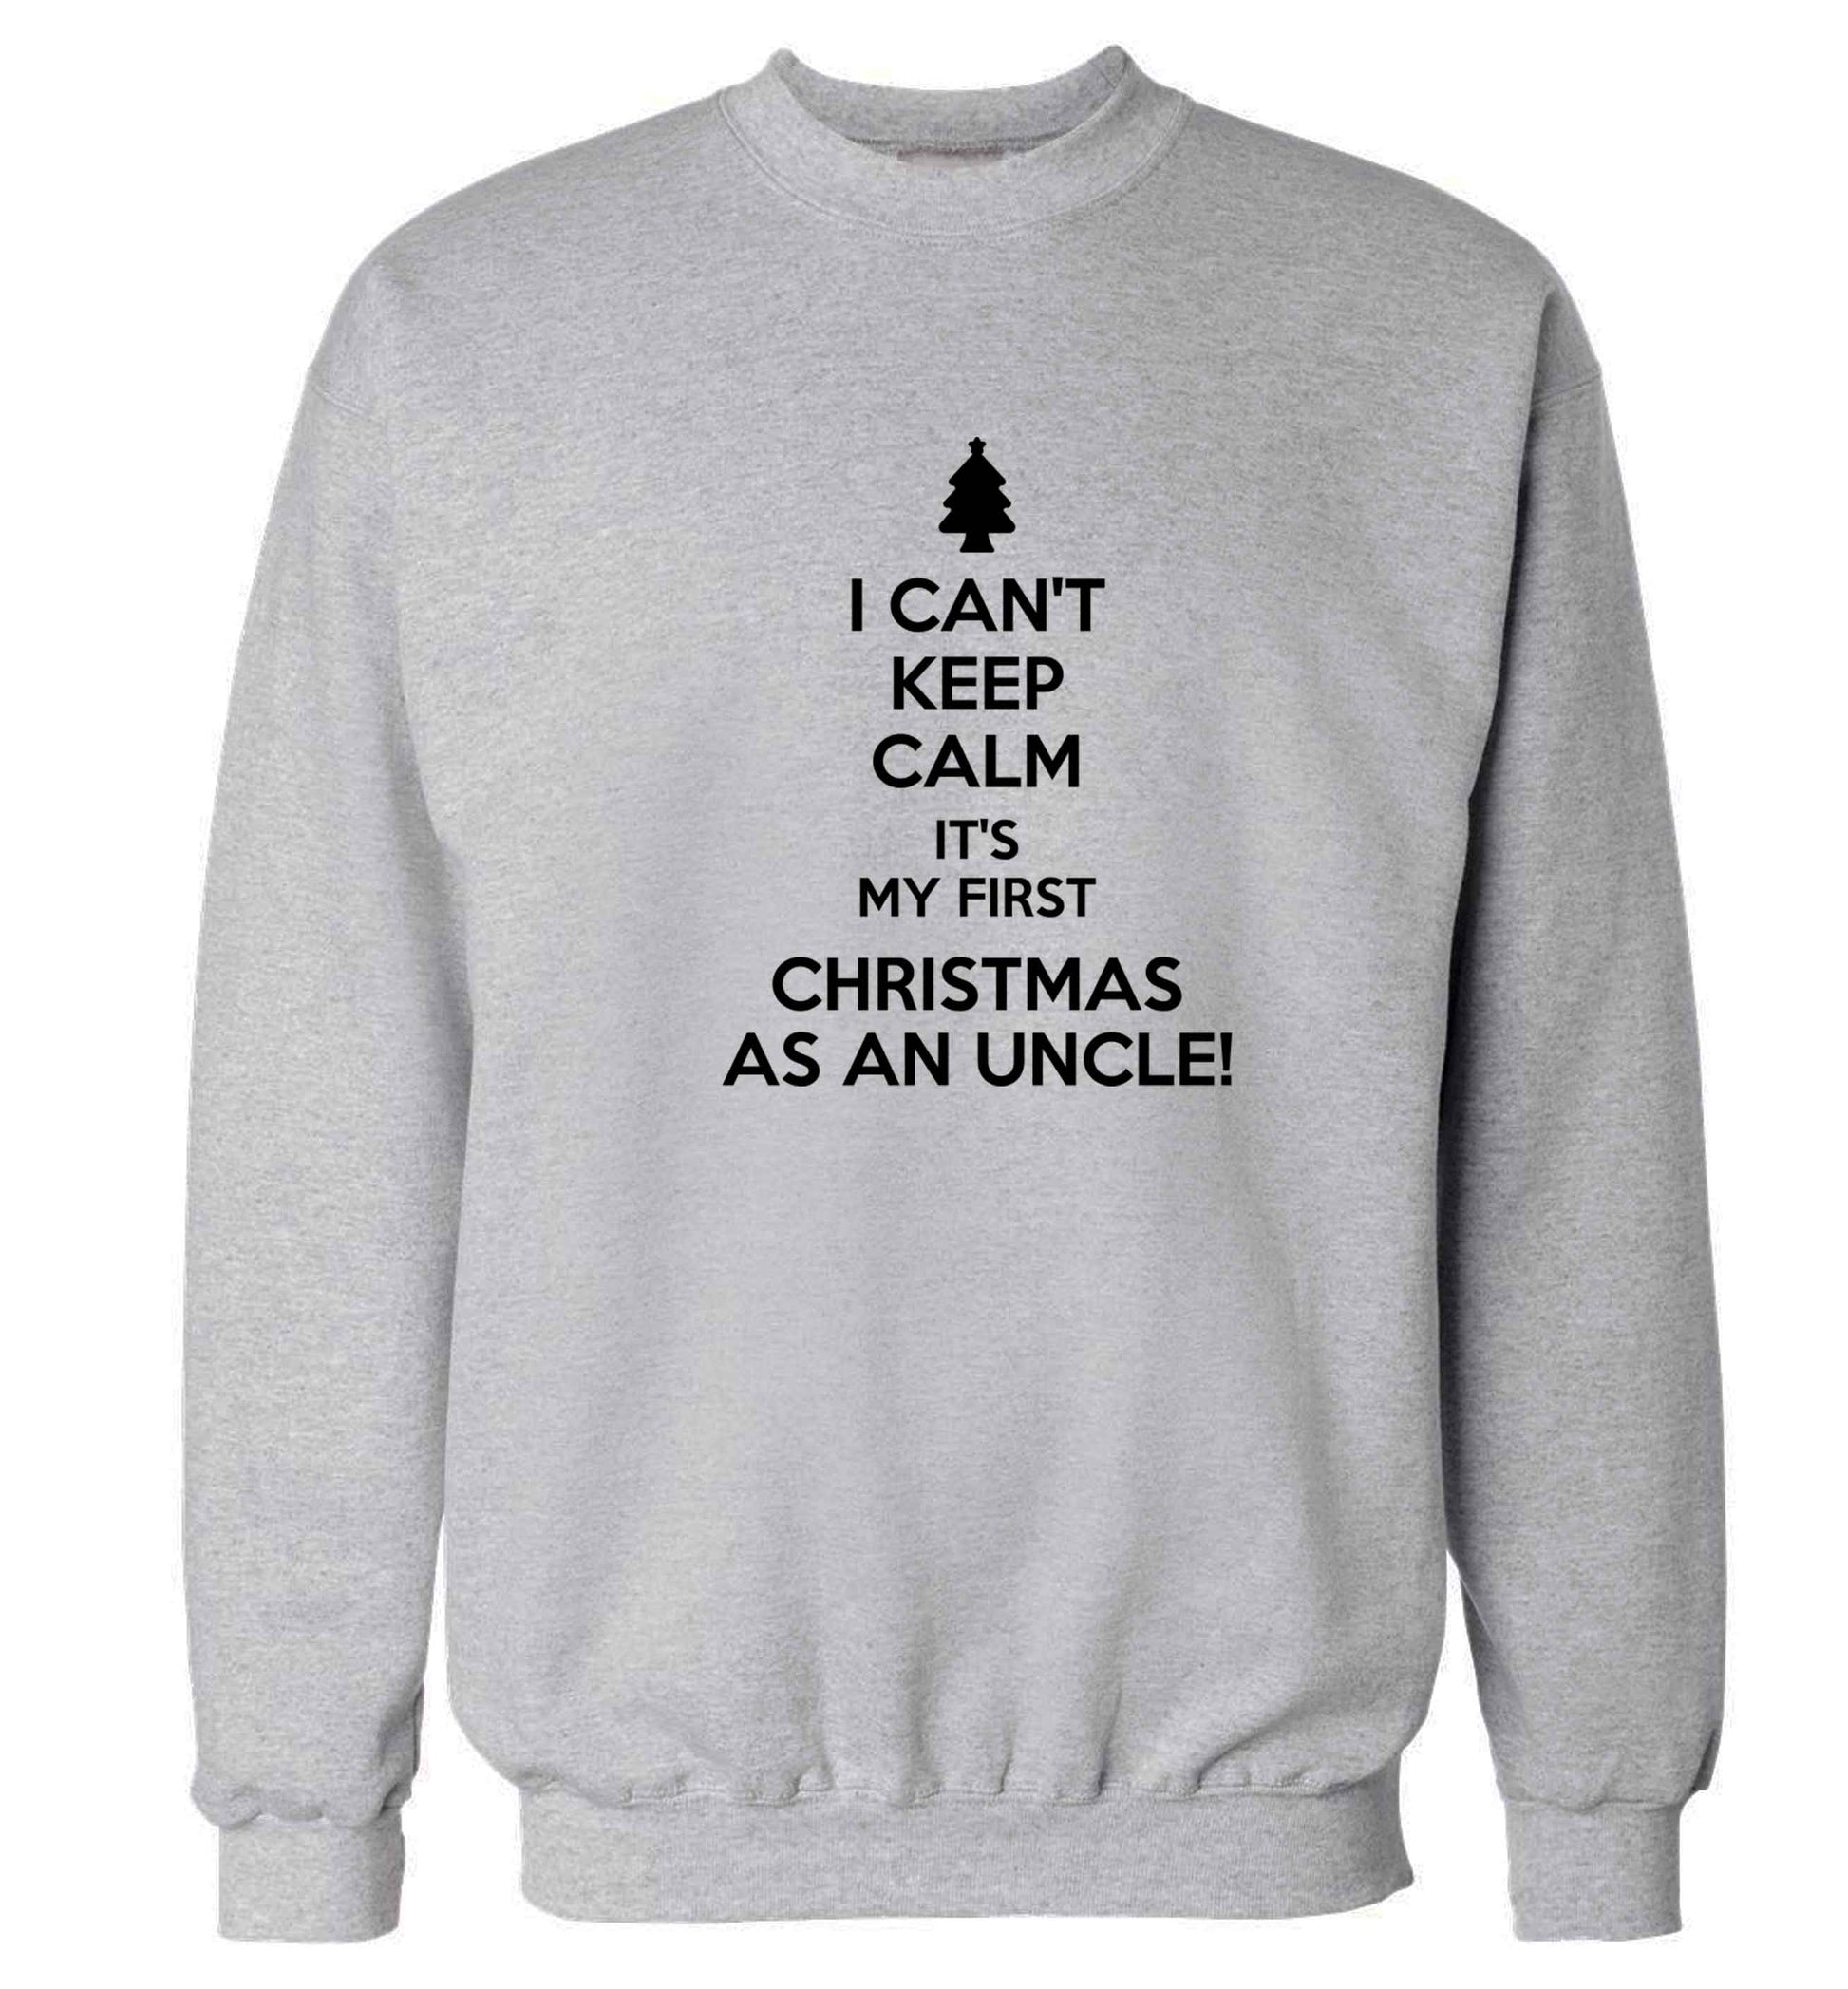 I can't keep calm it's my first Christmas as an uncle! Adult's unisex grey Sweater 2XL